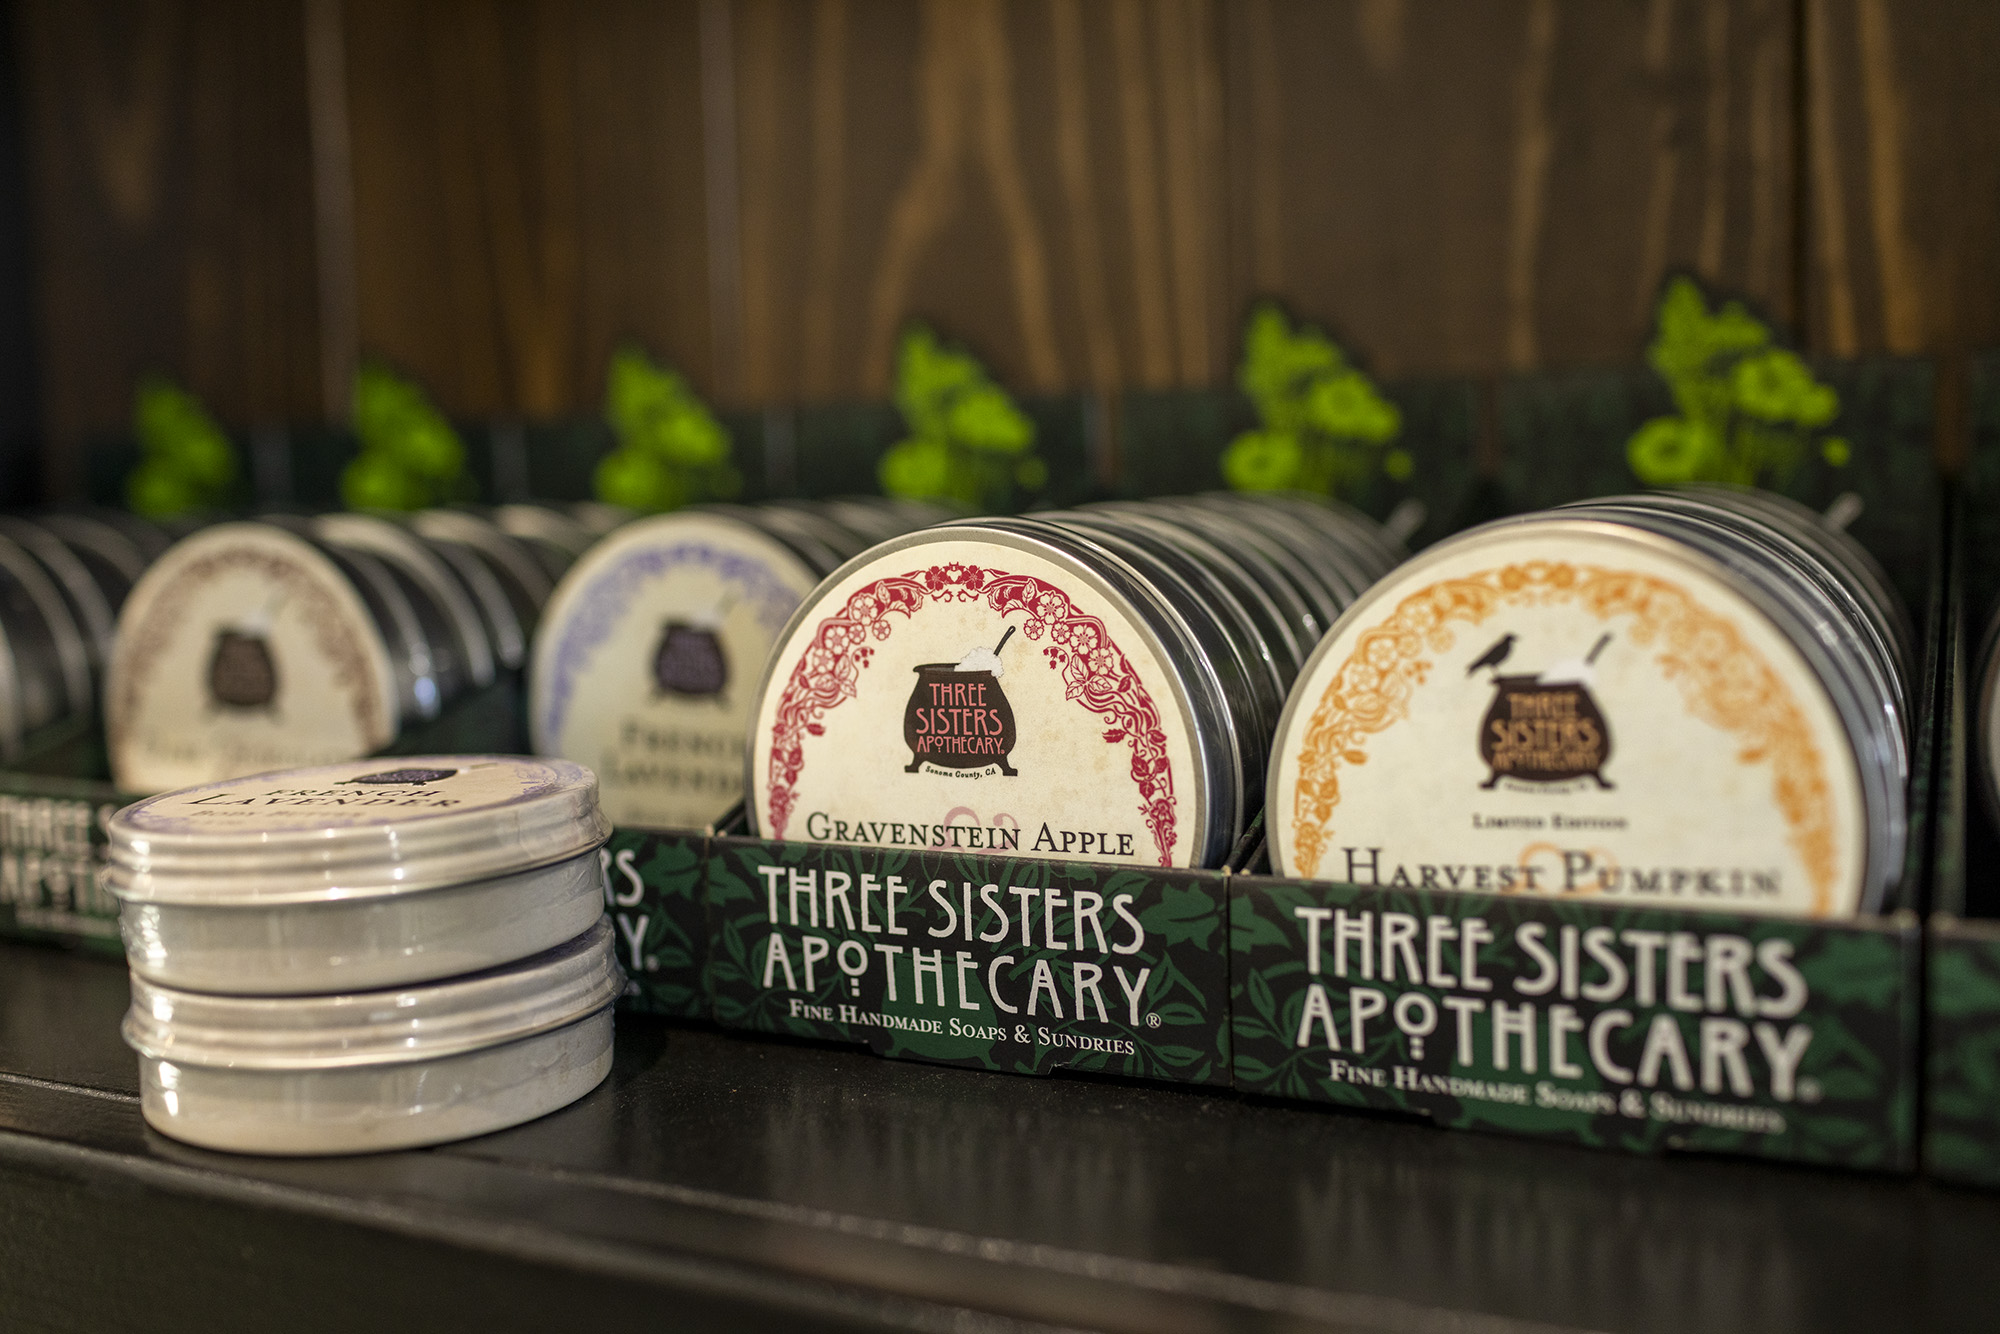 Three Sisters Apothecary body butters; Gravenstein Apple and Harvest Pumpkin.